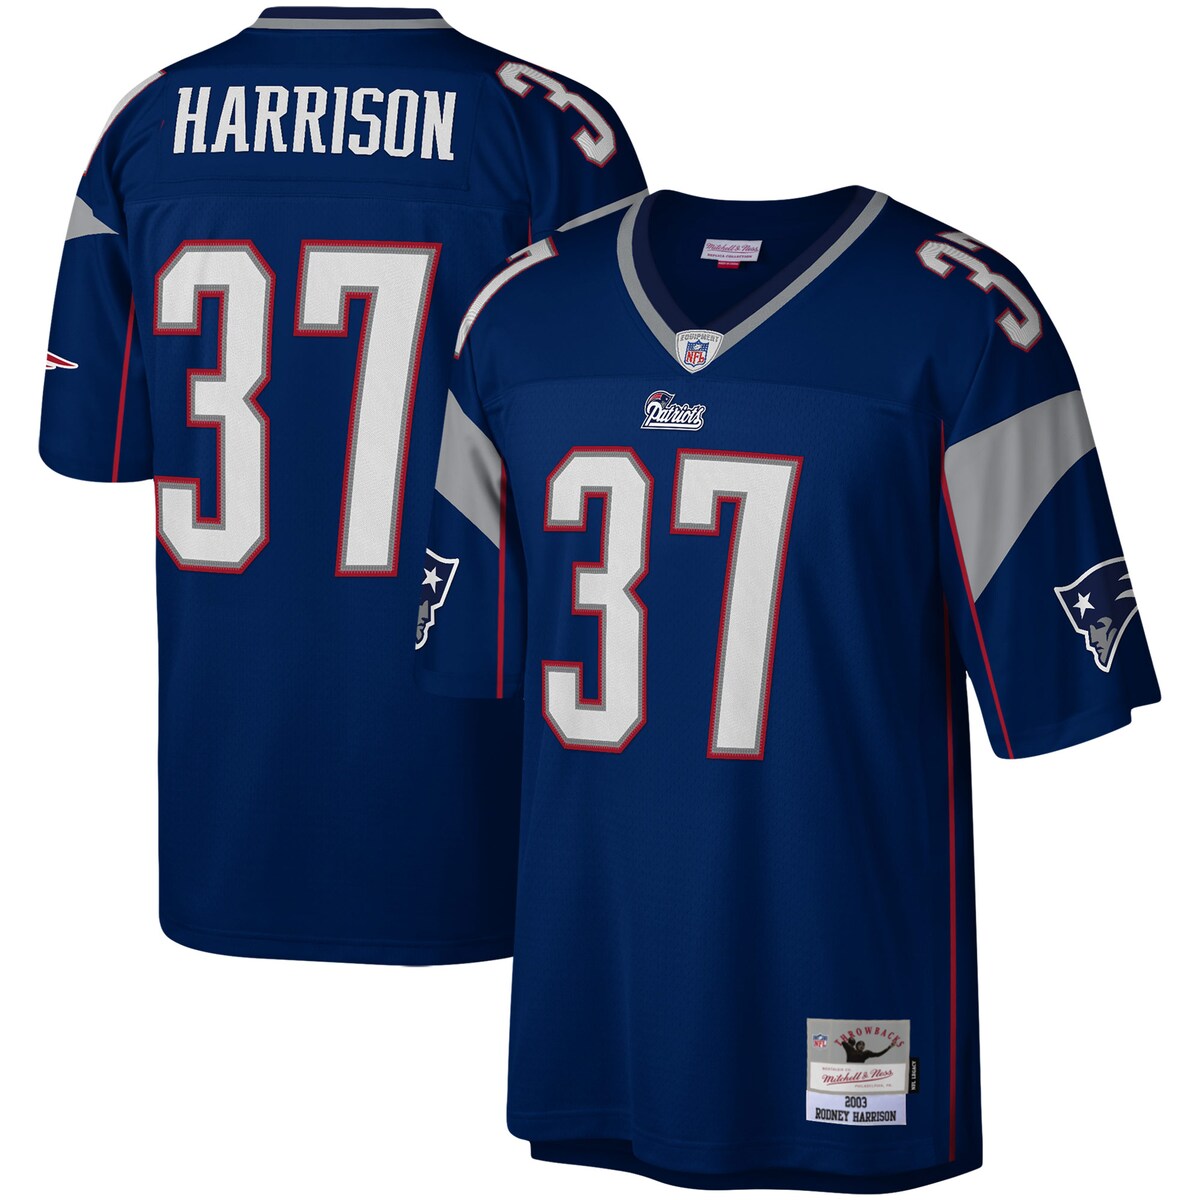 You're a massive New England Patriots fan and also loved watching Rodney Harrison play. Now you can show off your fandom for both when you get this Rodney Harrison New England Patriots Legacy replica jersey from Mitchell & Ness. It features distinctive throwback New England Patriots graphics on the chest and back, perfect for wearing at a home game. By wearing this jersey, you'll be able to feel like you're reliving some of the great plays that Rodney Harrison accomplished to lead the New England Patriots to glory.Machine wash, line dryImportedDroptail hem with side slitsBrand: Mitchell & NessMesh bodiceRib-knit v-neck collarScreen print accentsTackle twill graphicsWoven tags at bottom hemMaterial: 100% PolyesterOfficially licensedThrowback Jersey